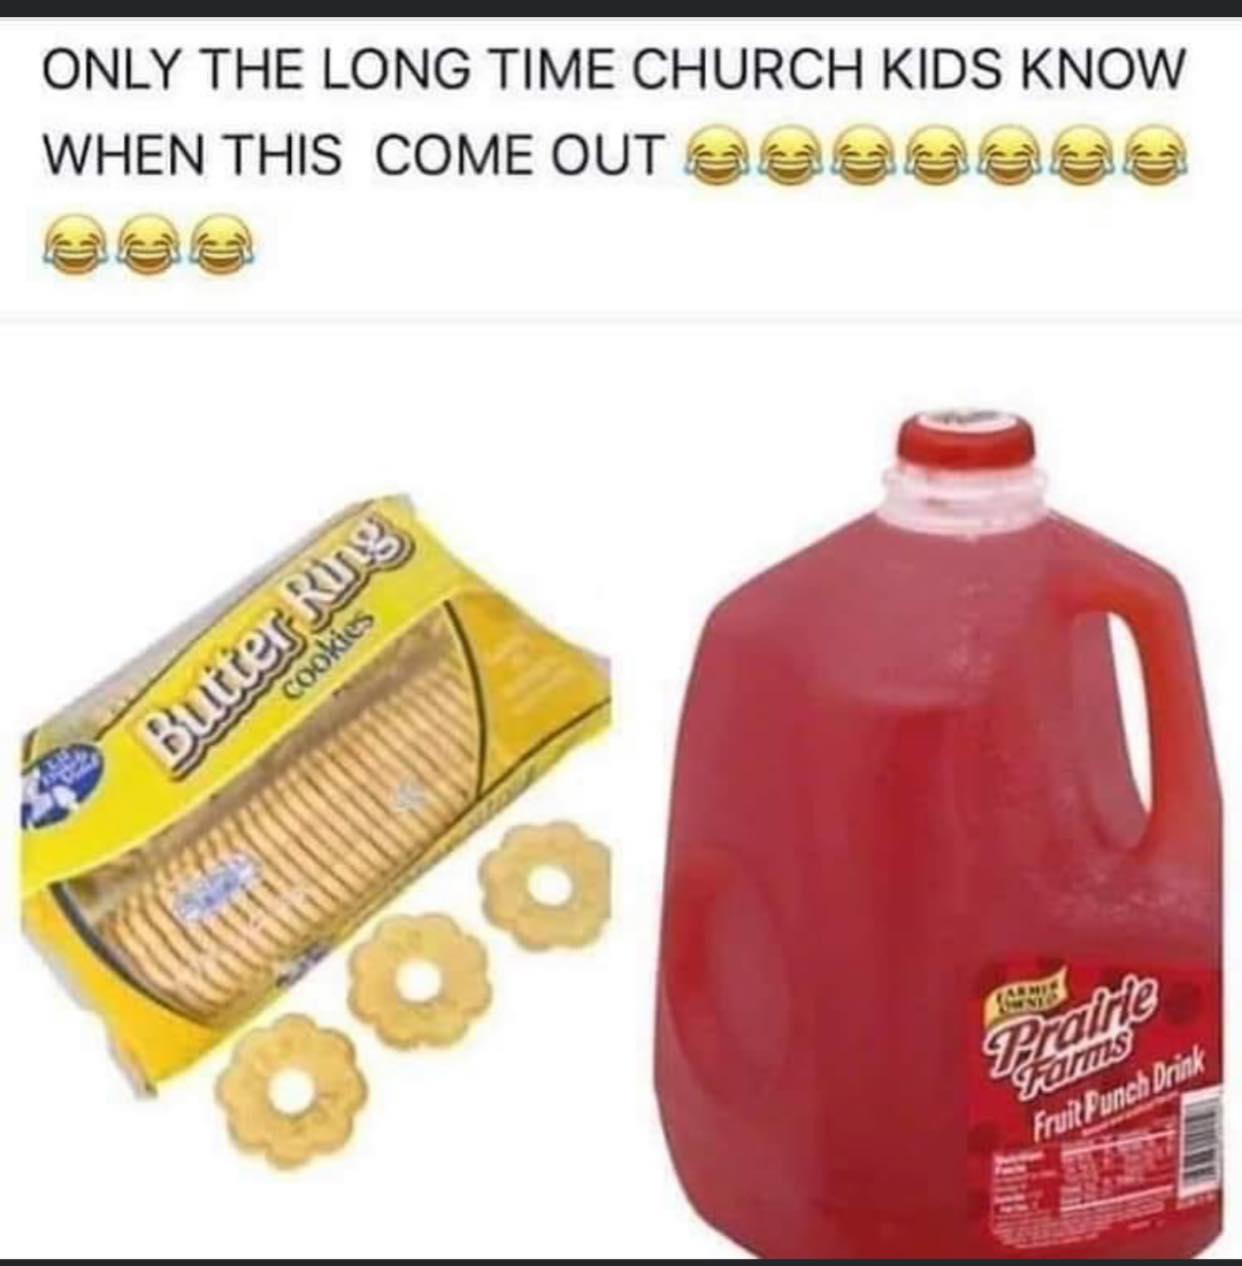 Things to relate to over 30 - Only The Long Time Church Kids Know When This Come Out cookies Butter Ring Ante Forms Fruit Punch Drink